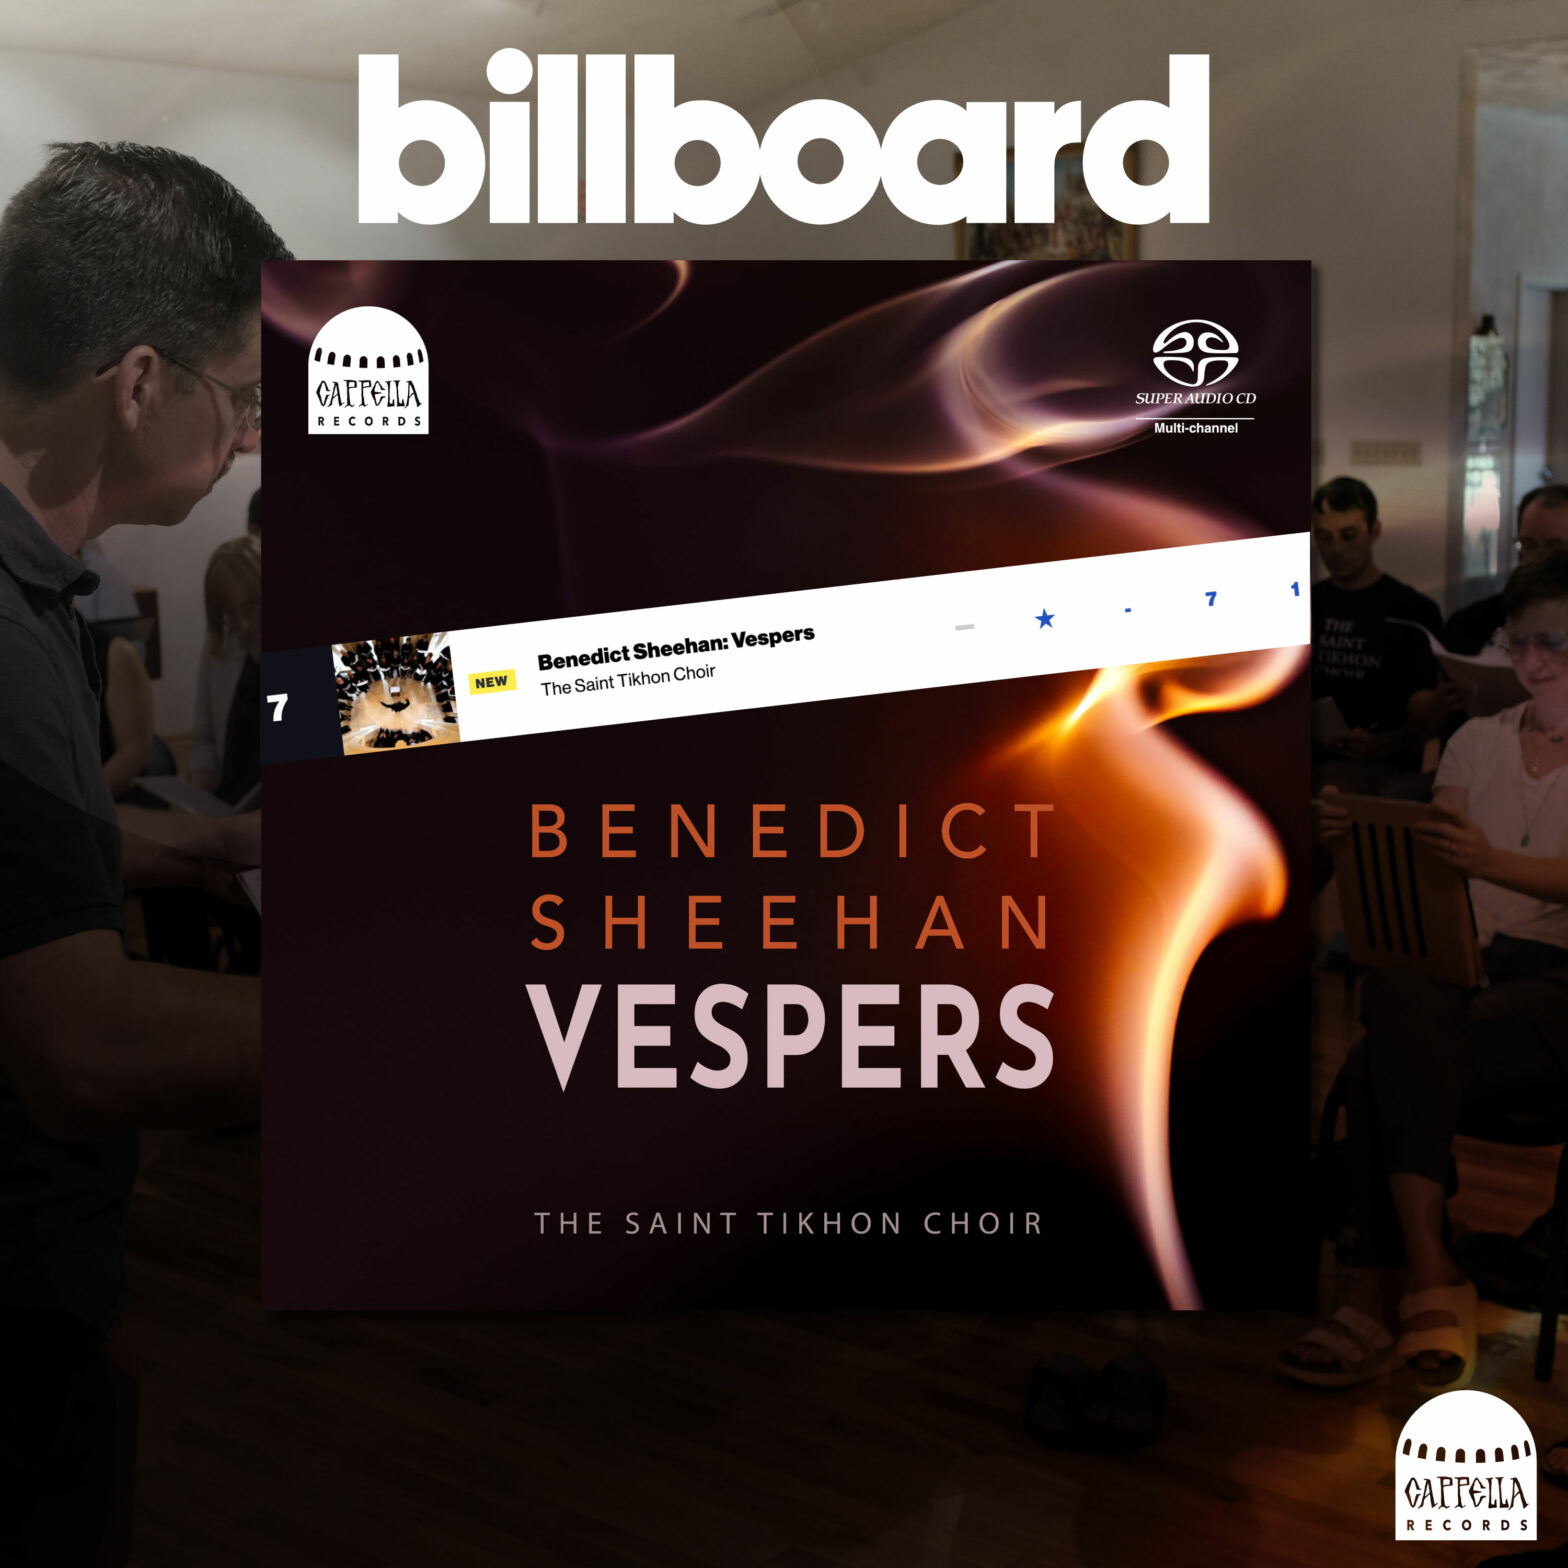 Benedict Sheehan conducting the Saint Tikhon Choir in background with billboard logo at top and the Benedict Sheehan Vespers album art in the center on top of the choir. A screenshot of the Billboard Chart listing is on top of the album cover showing the #7 debut. The Cappella Records logo is in the bottom right corner